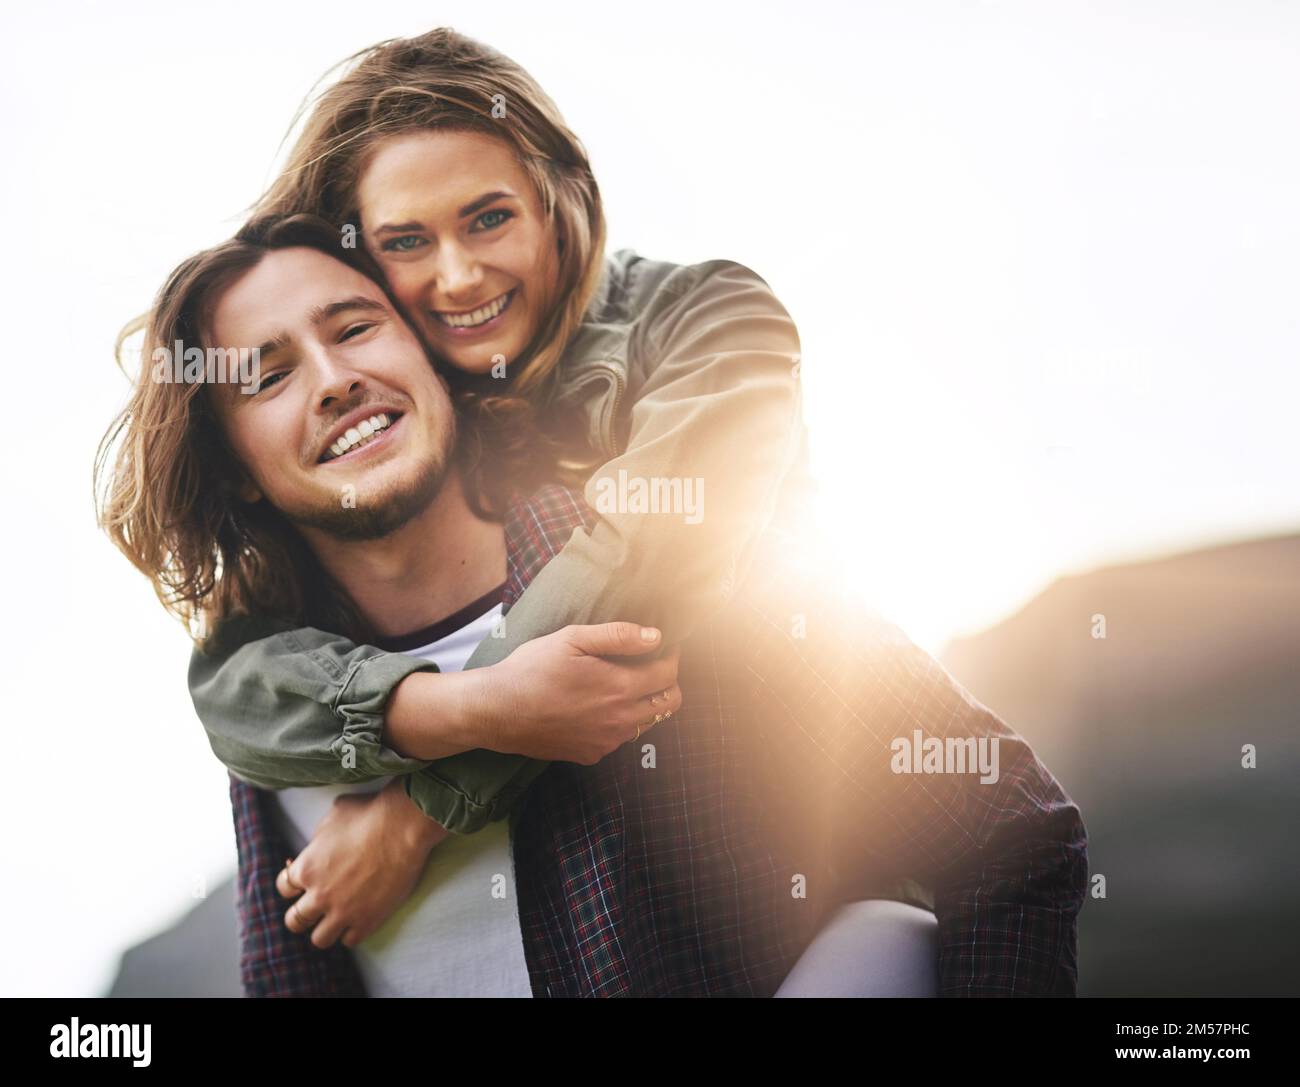 We belong together. Portrait of a happy young couple having fun outside. Stock Photo